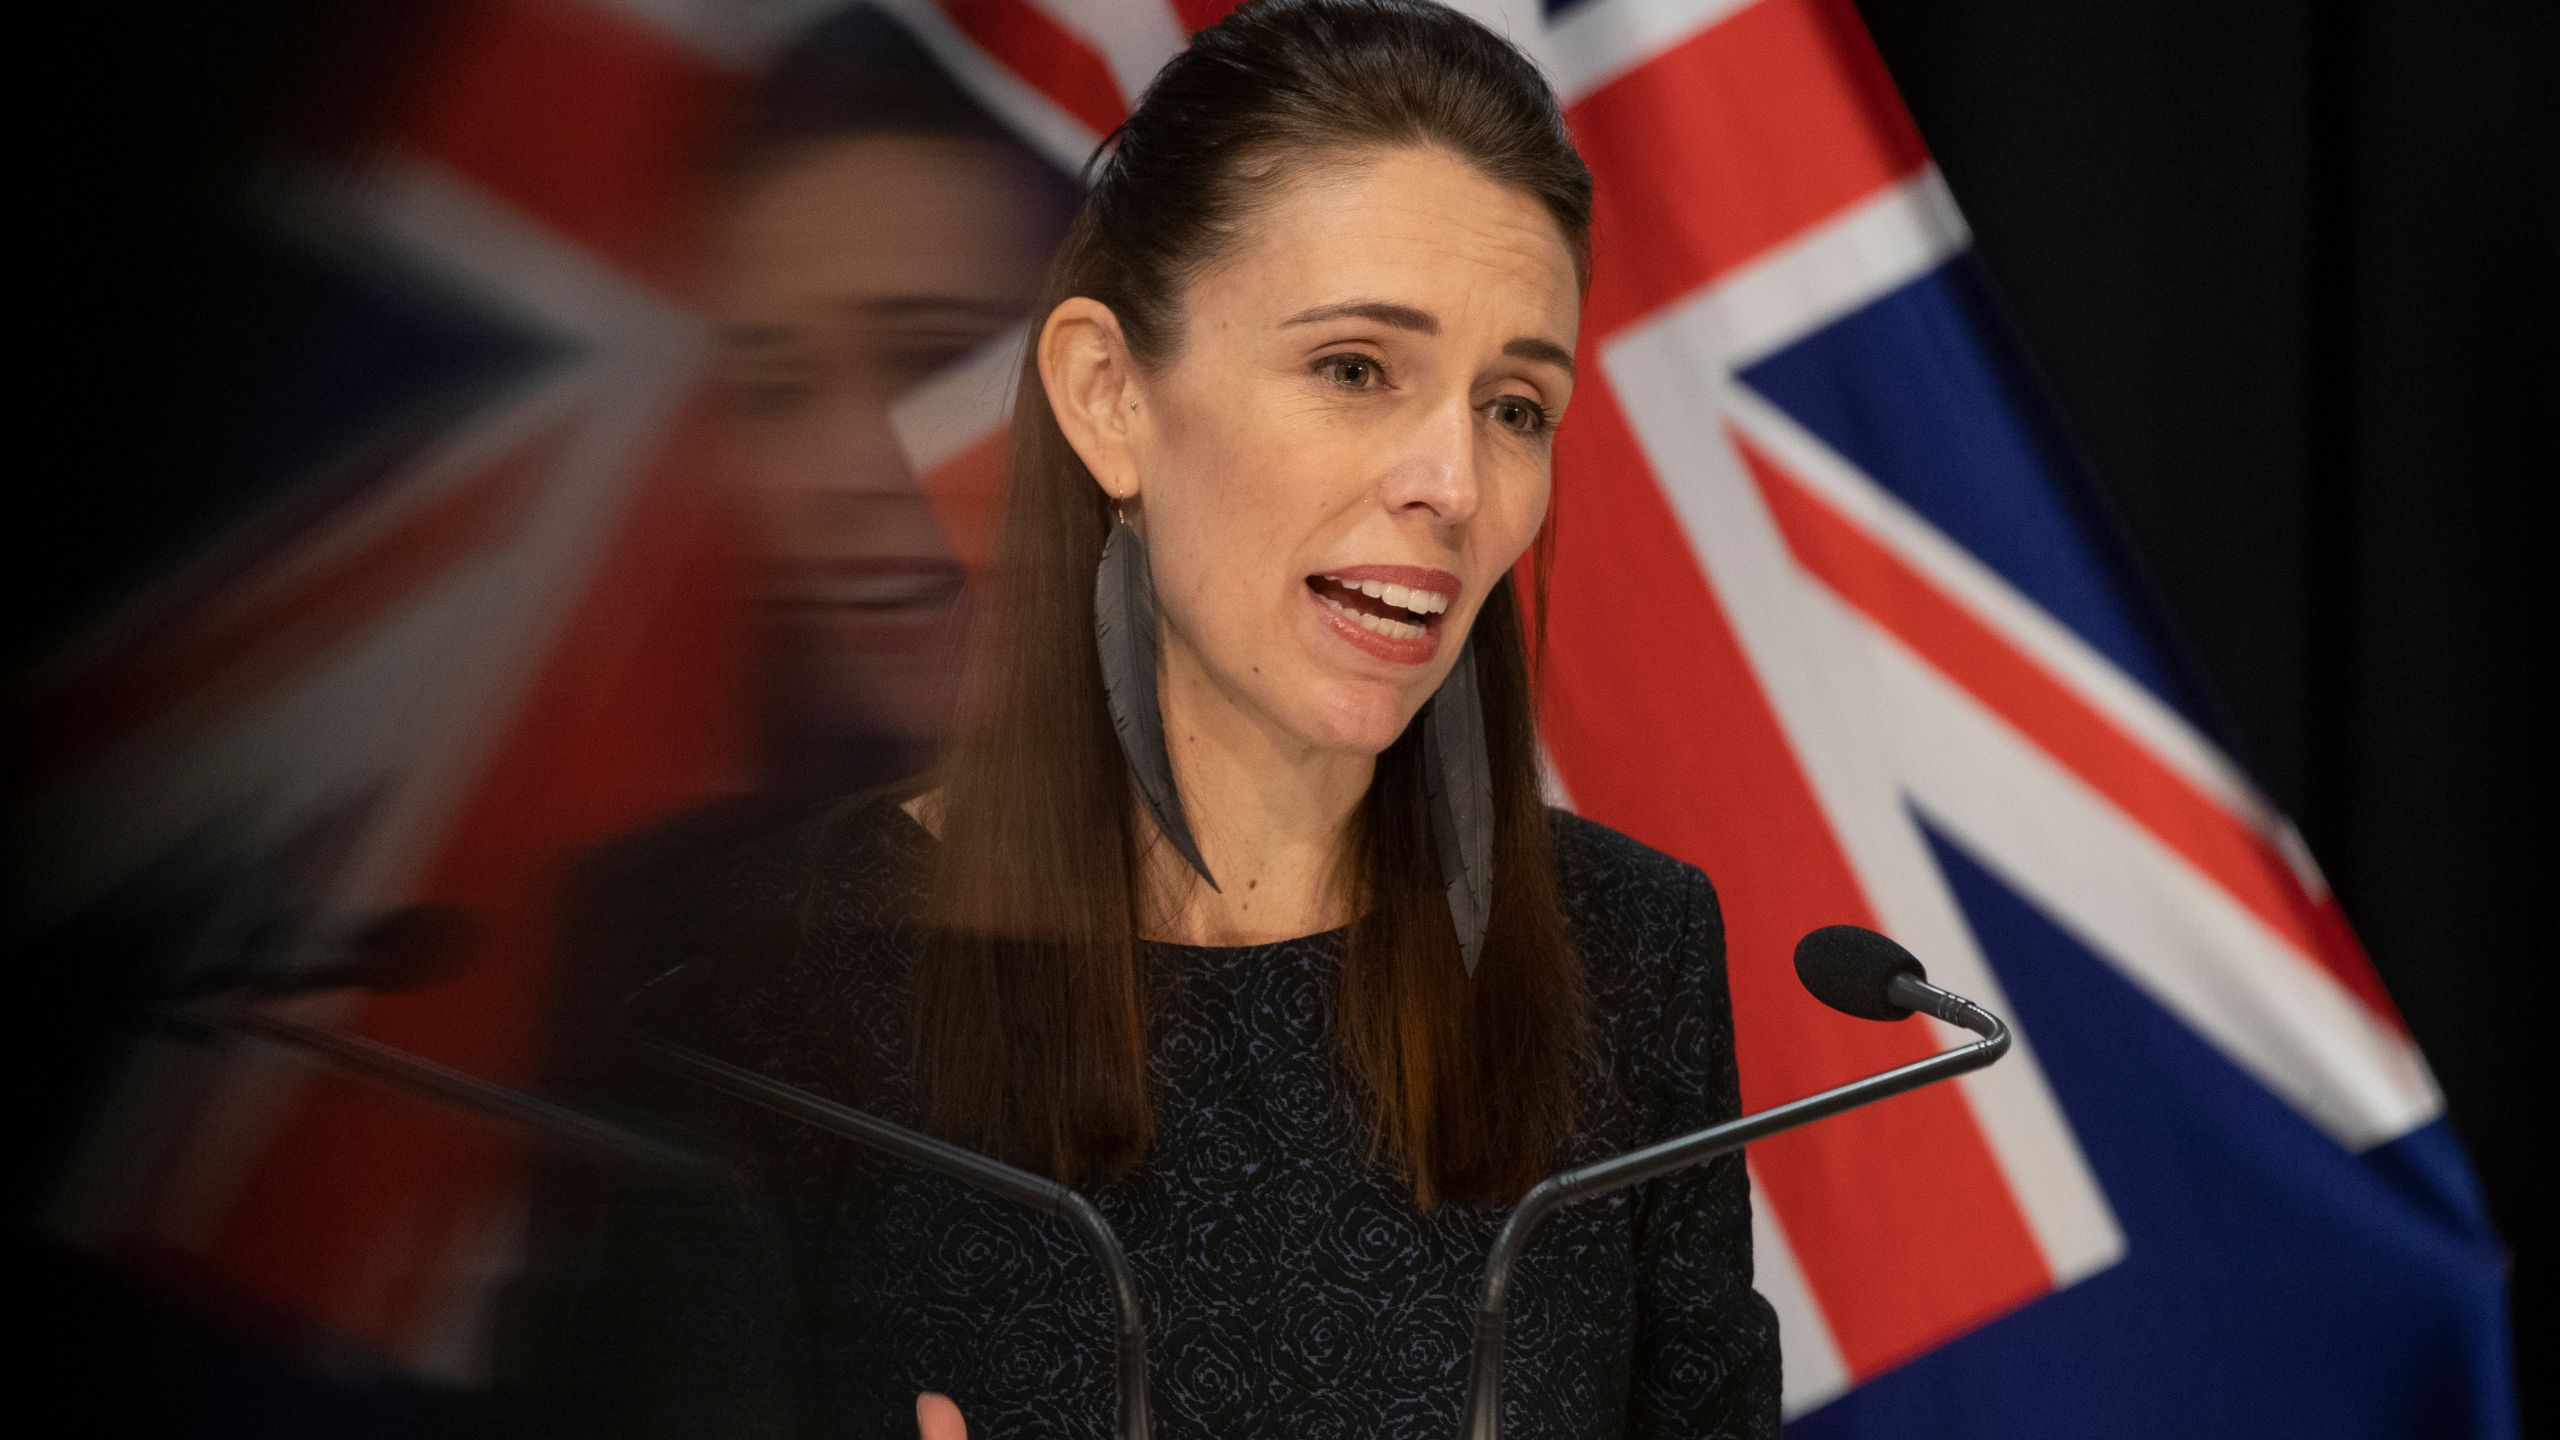 After eliminating COVID- New Zealand PM says flattening curve wasn't enough